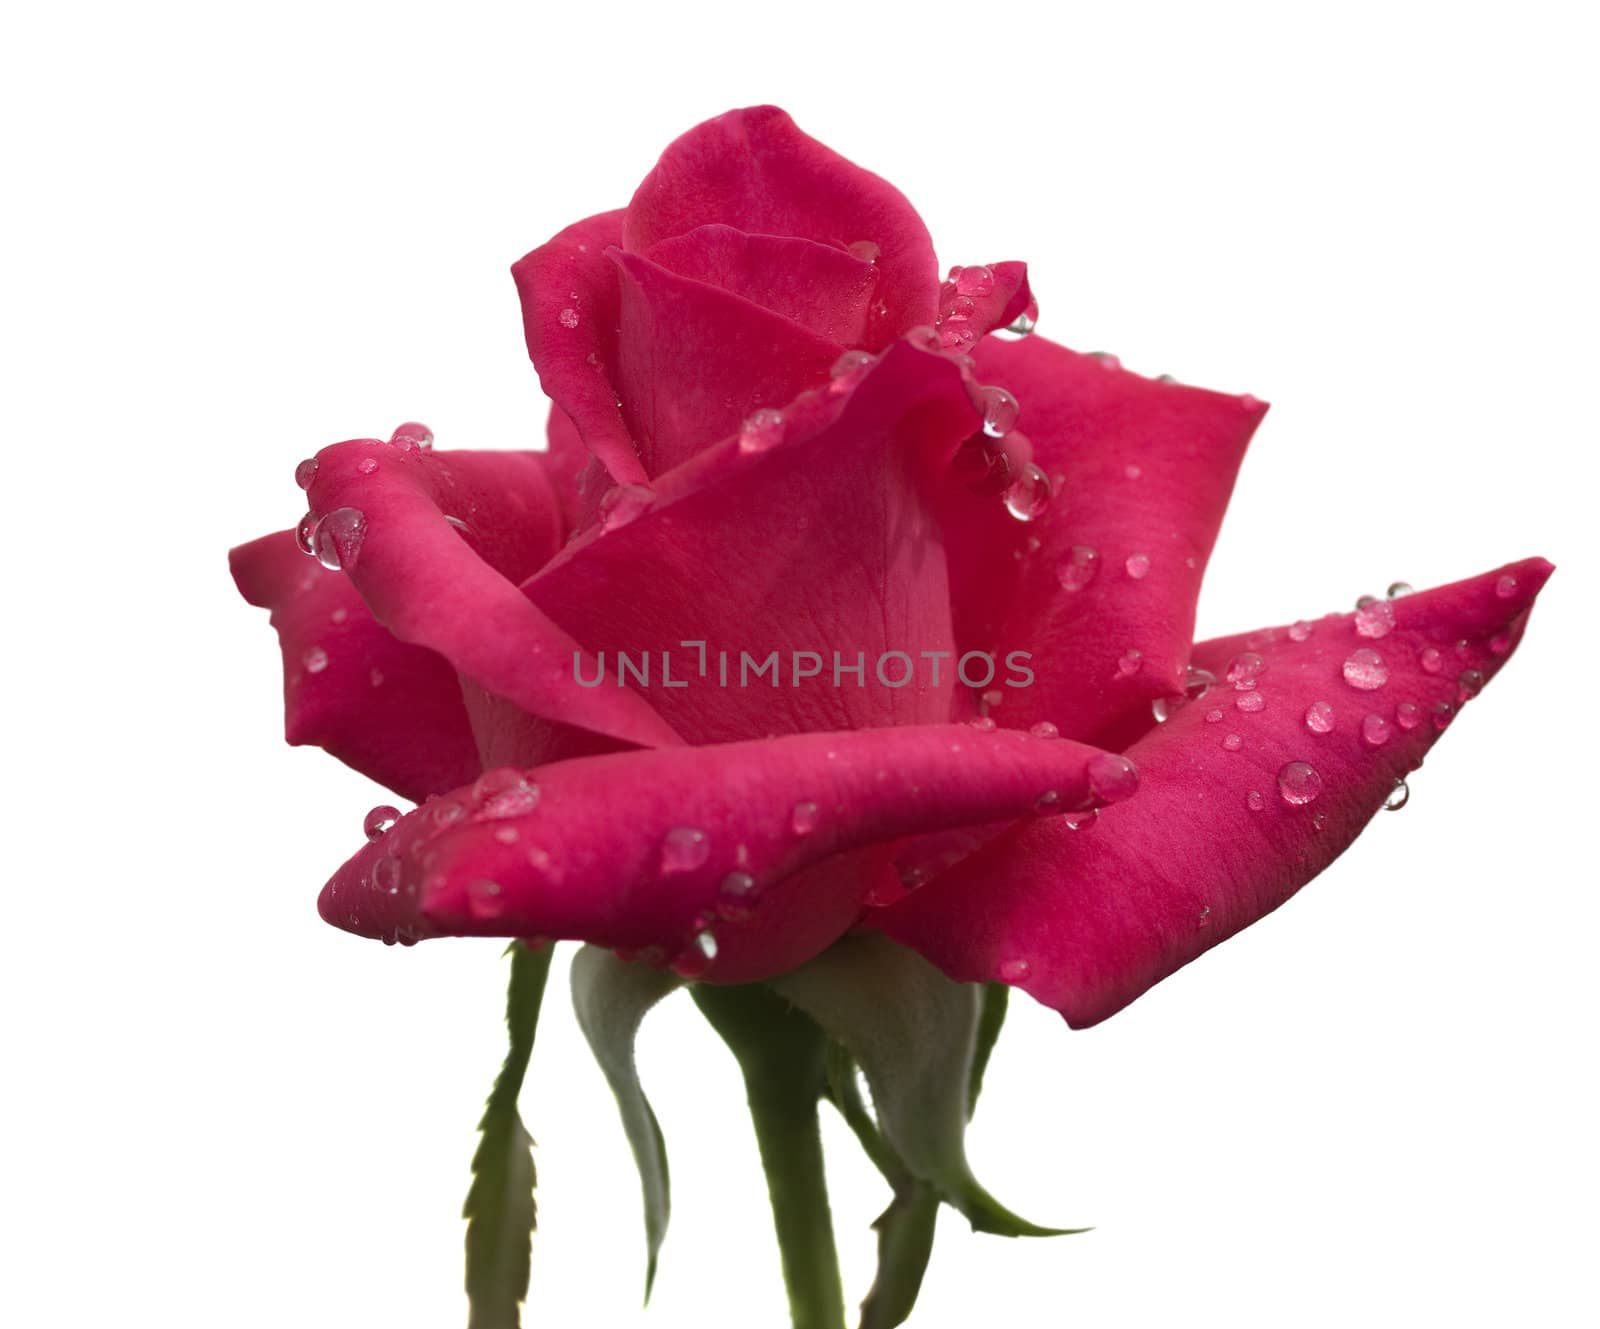 fresh raindrops dew on cerise red rose flower stem with foliage isolated on white